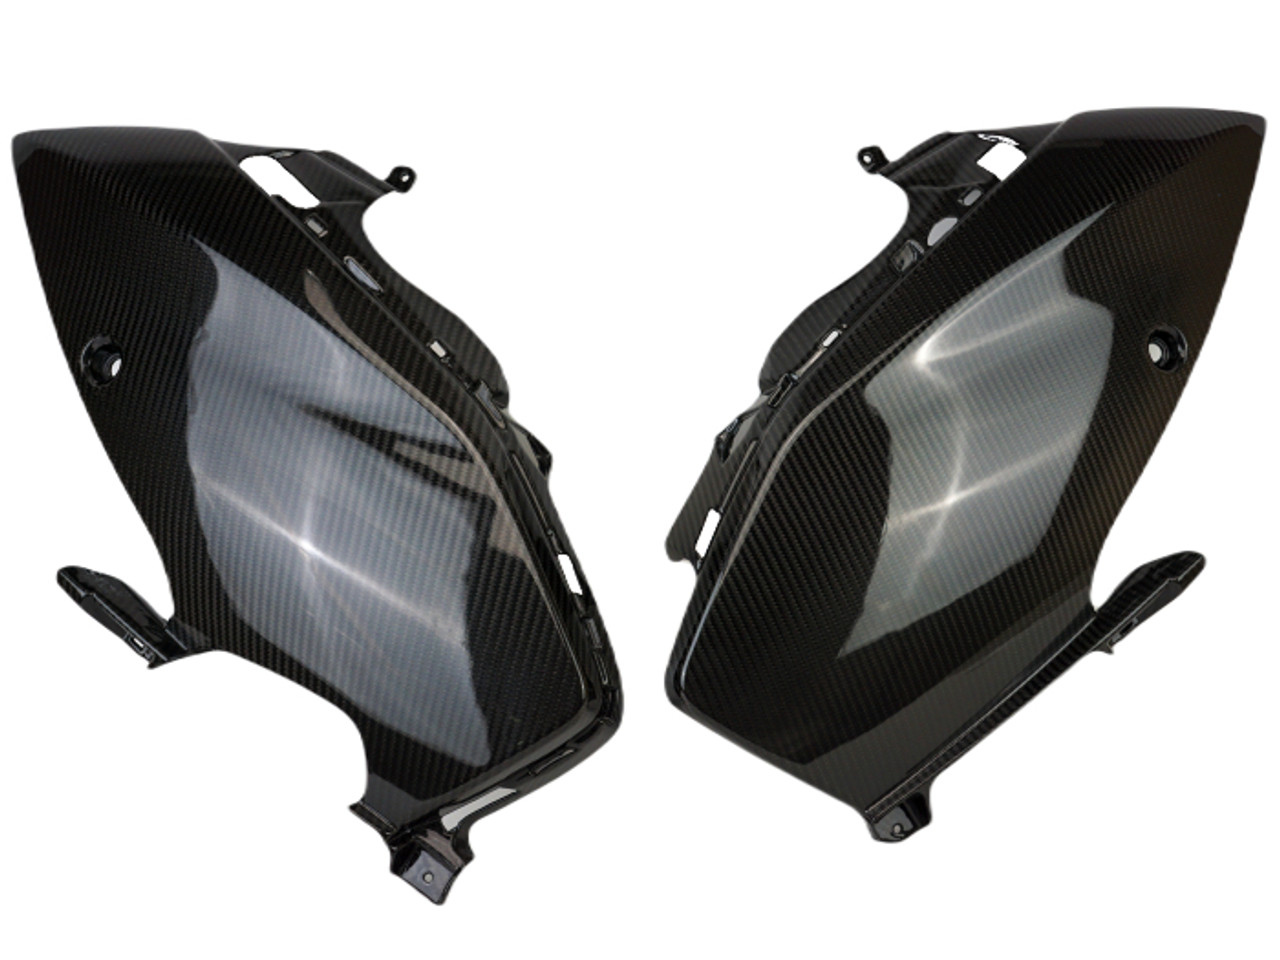 Knee Side Covers in Glossy Twill Weave Carbon Fiber for Suzuki GSX1300 R Hayabusa 2021+